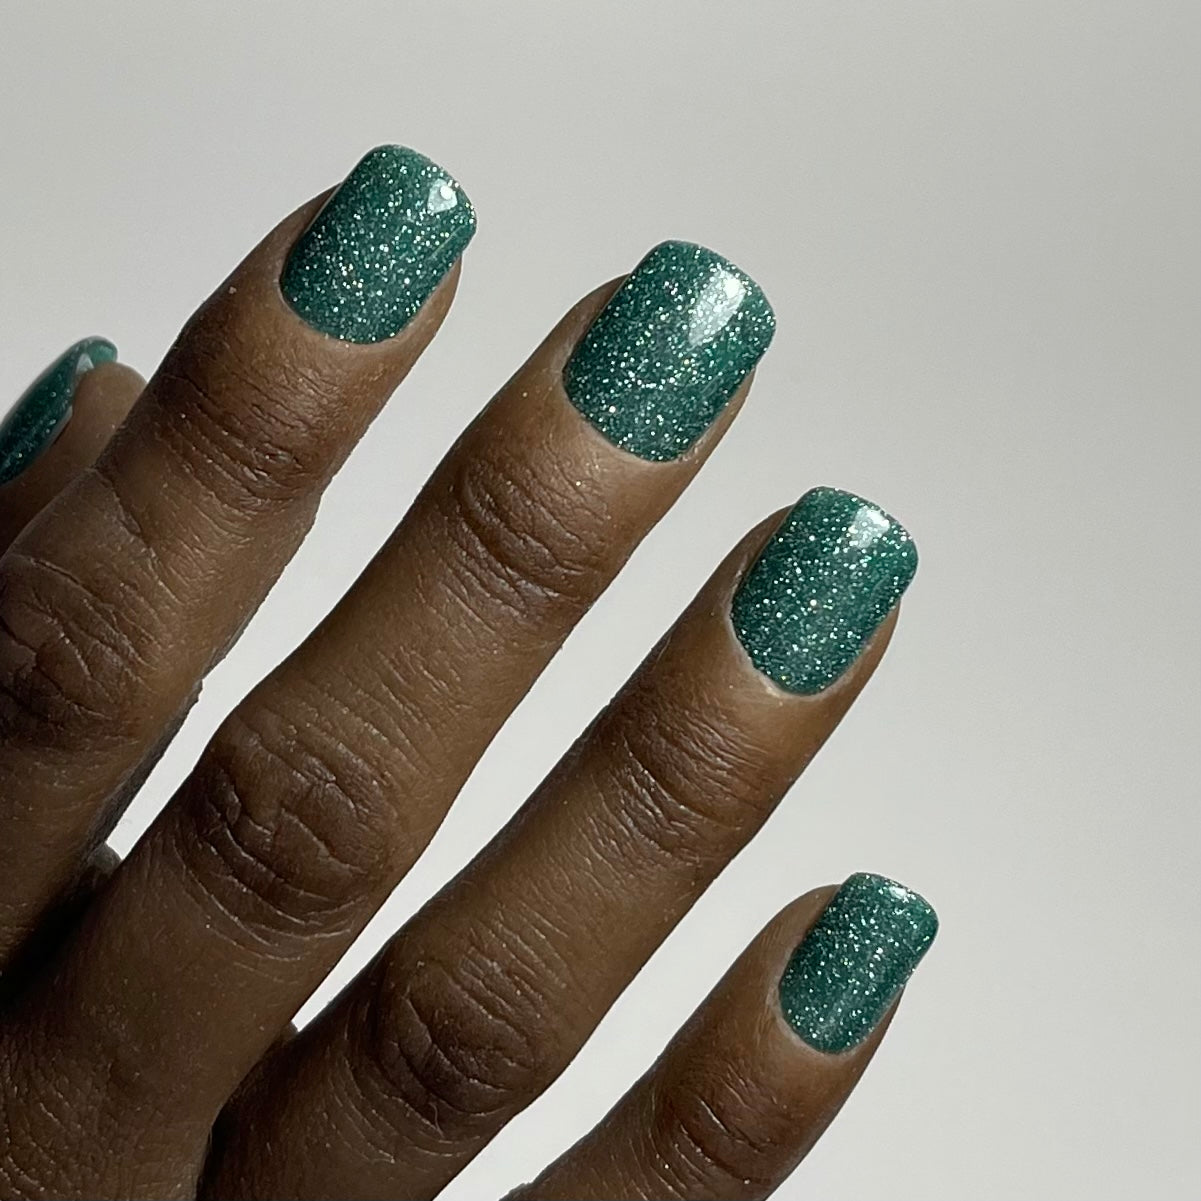 ILNP Good Fortune - Radiant Emerald Green Shimmer Nail Polish